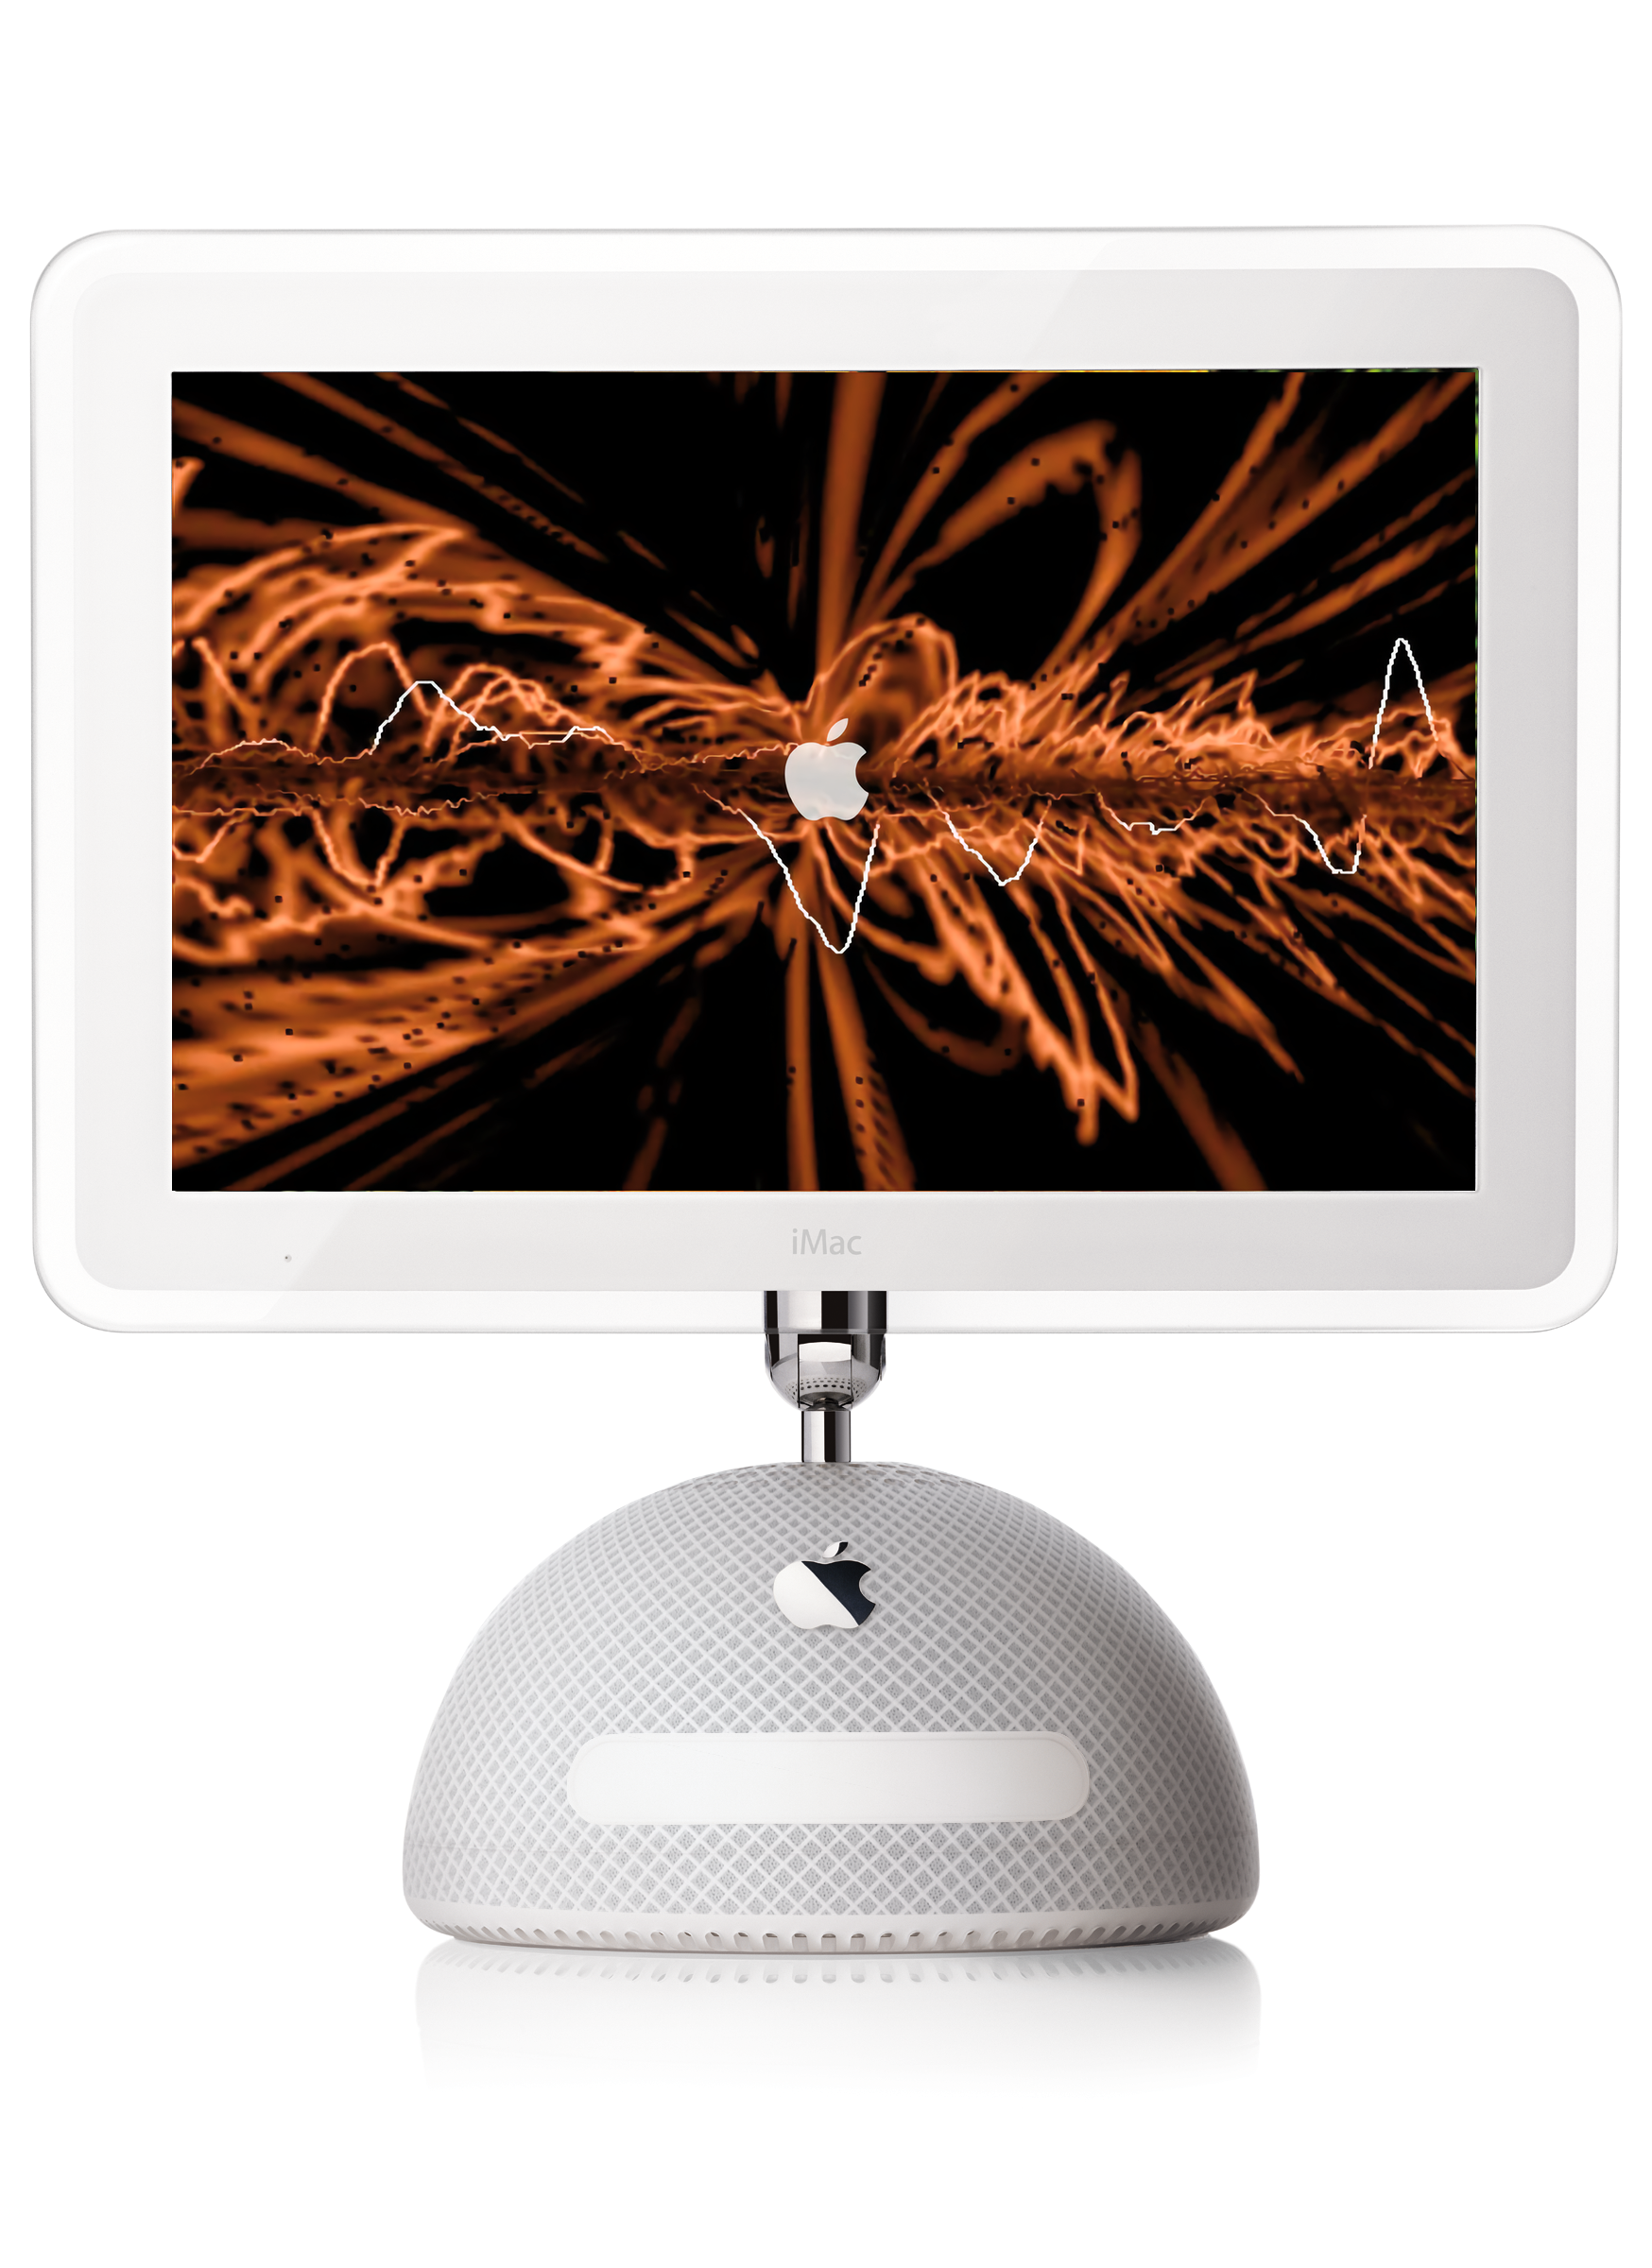 17-inch iMac G4 with HomePod fabric covering displaying the iTunes classic visualizer.